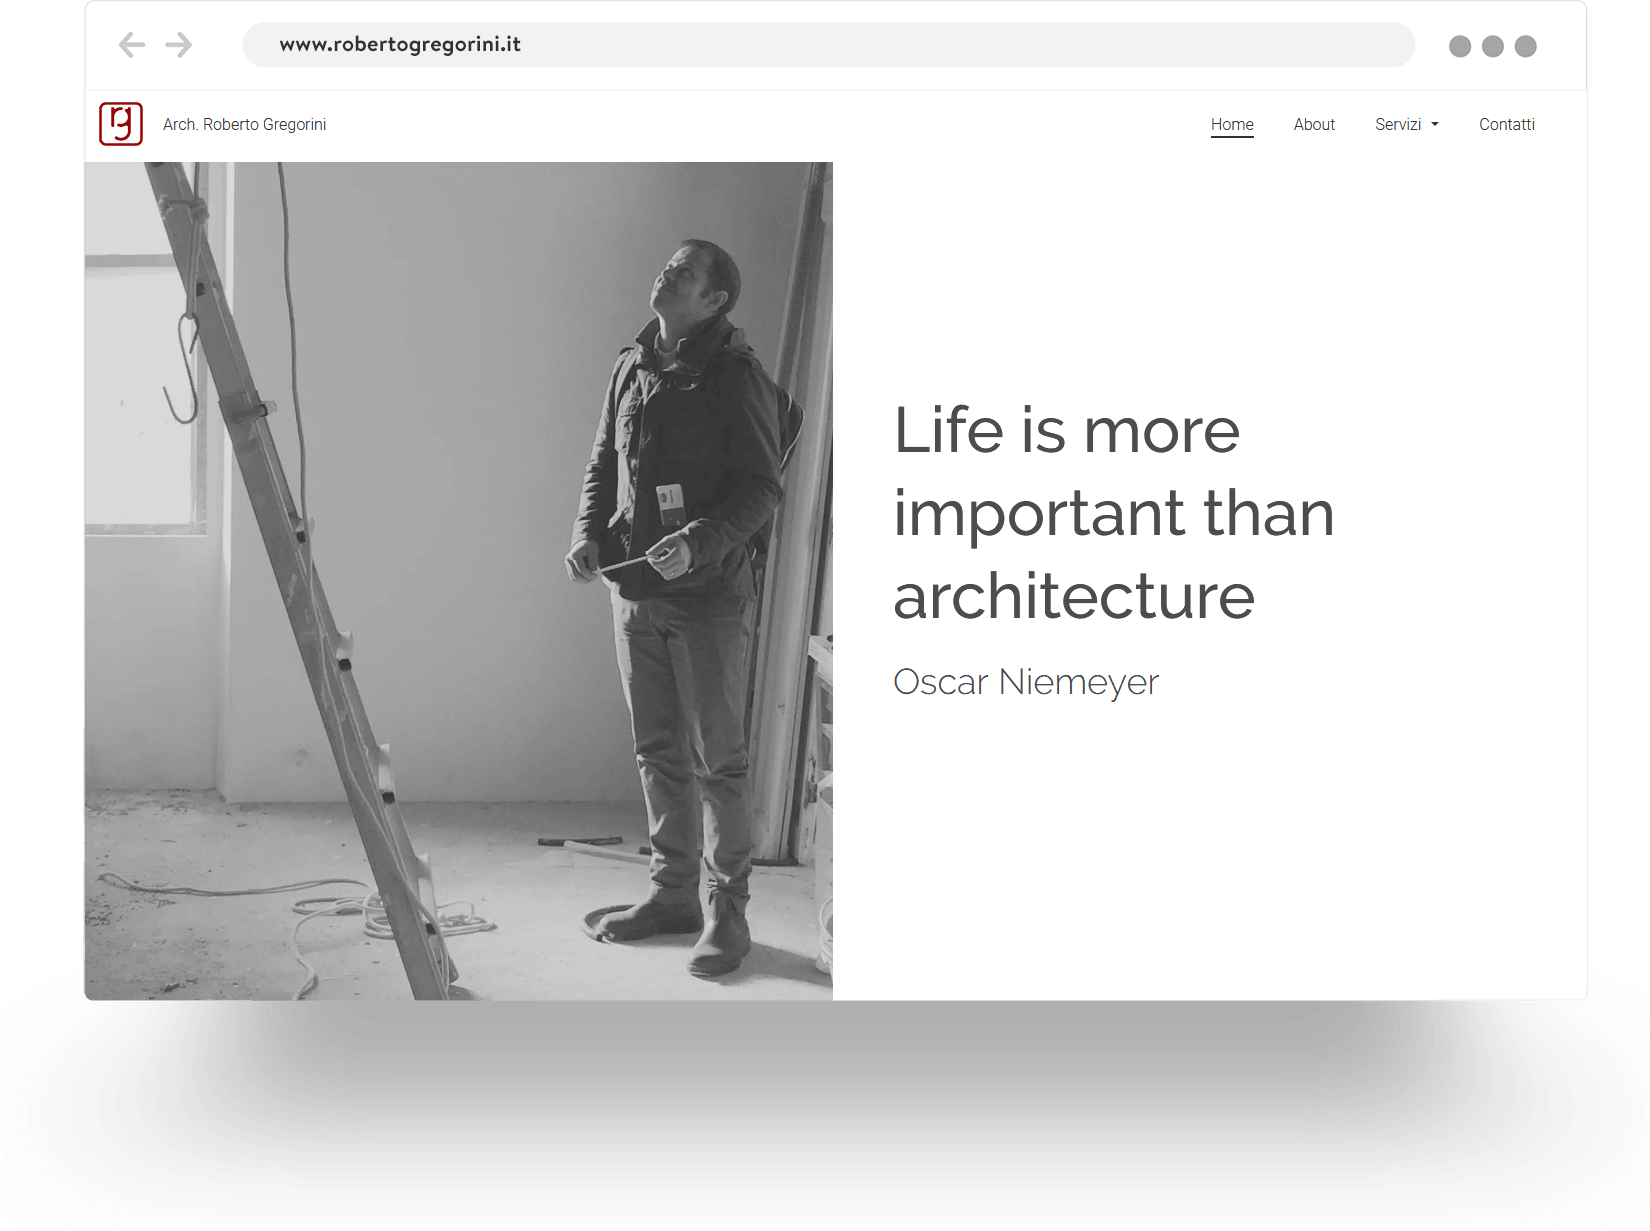 Example of an architecture website built with Jimdo showing an architect looking up to the top of a ladder